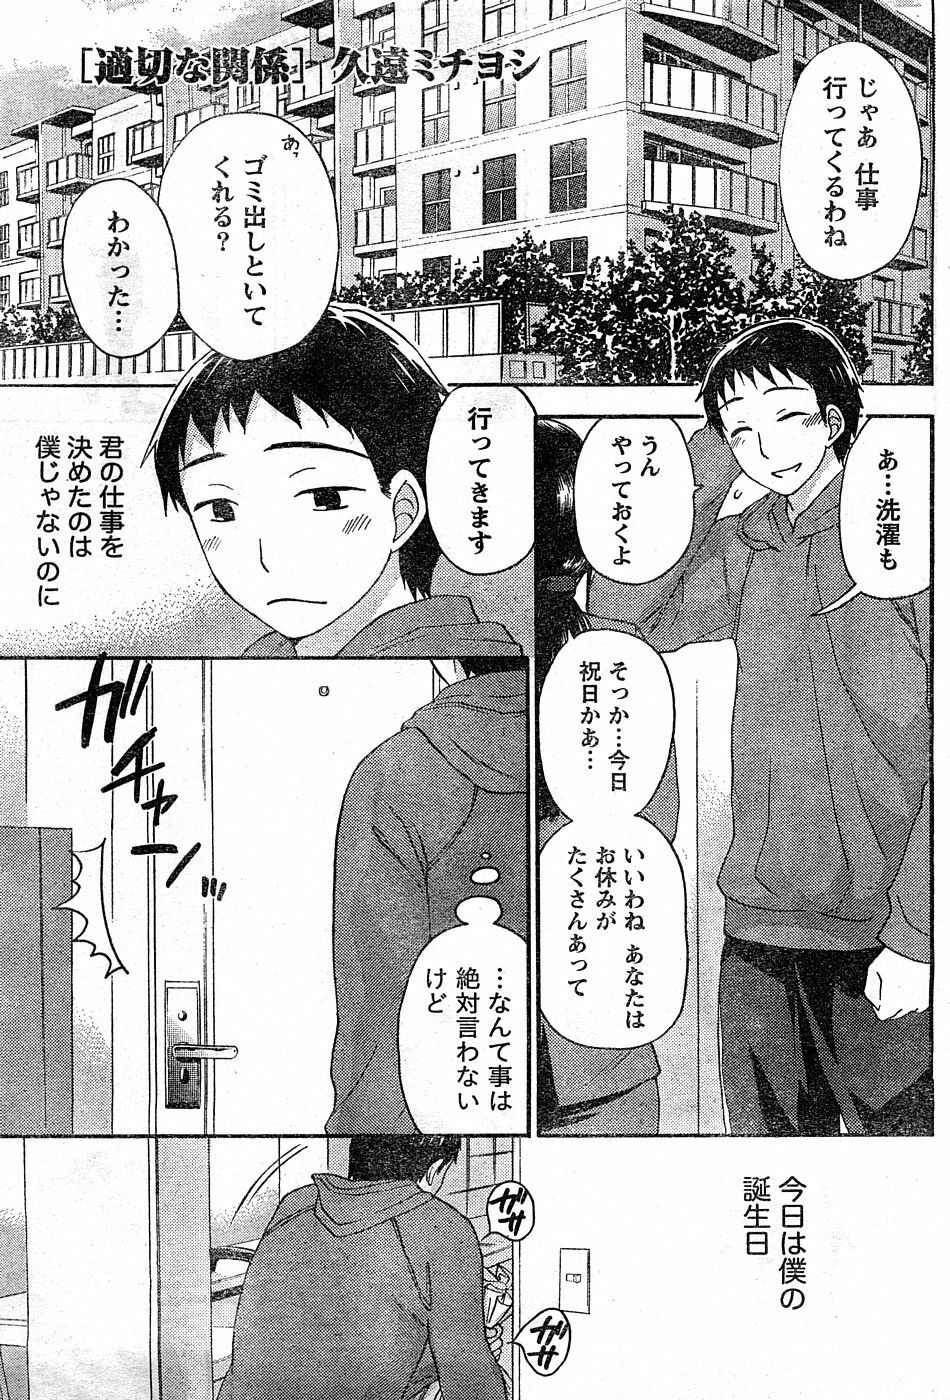 Monthly Vitaman 2009-02 [Incomplete] page 34 full